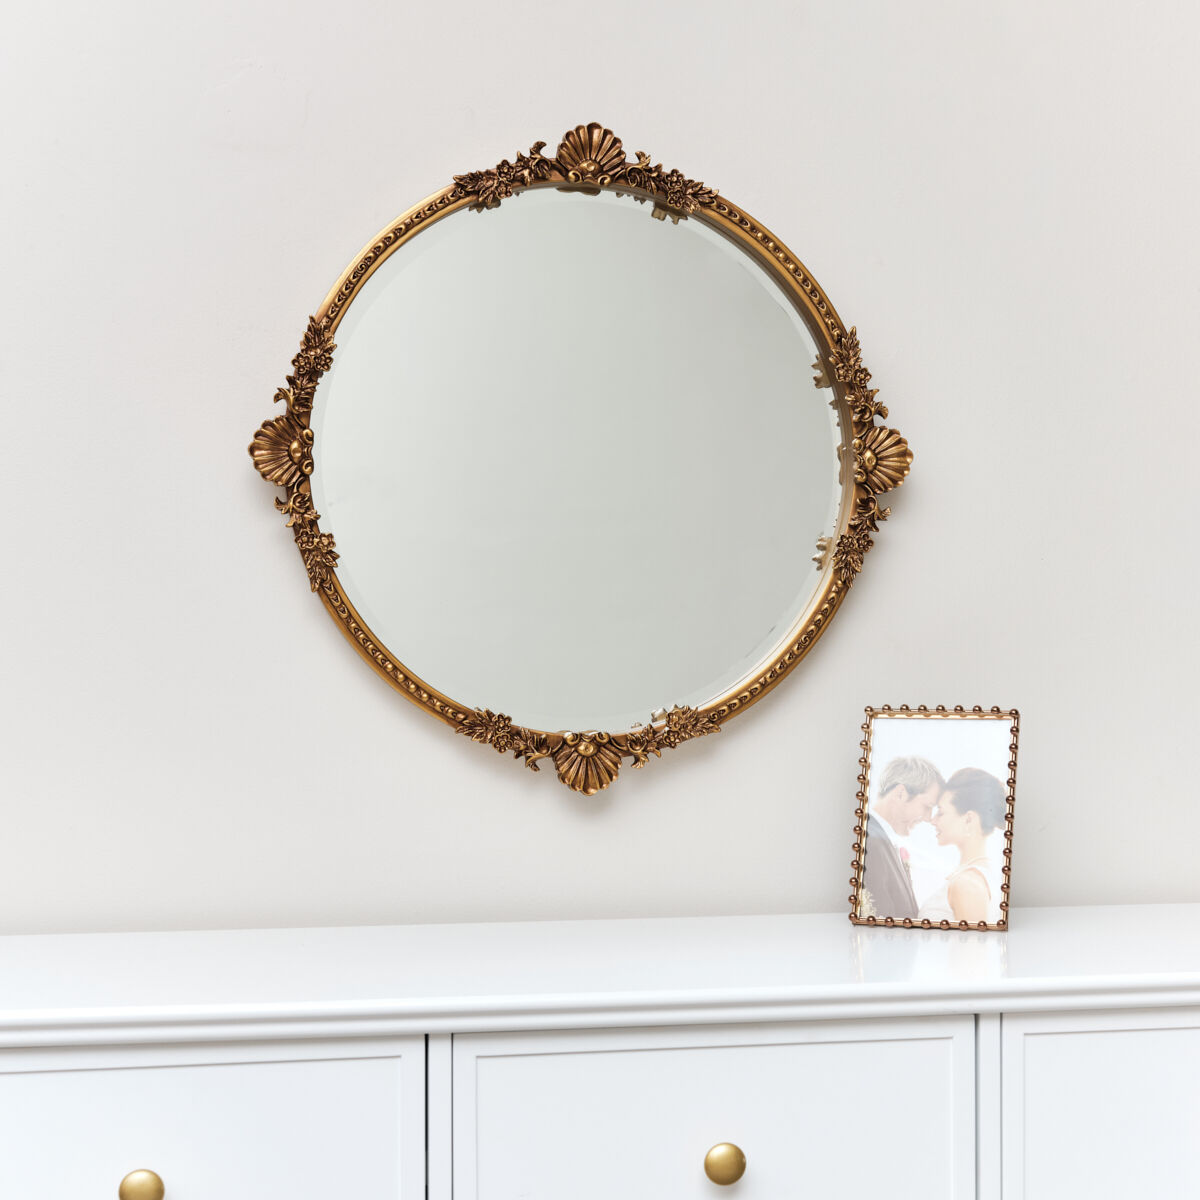 Round Gold Ornate Wall Mirror 56cm x 56cm Material: Wood, glass, resin